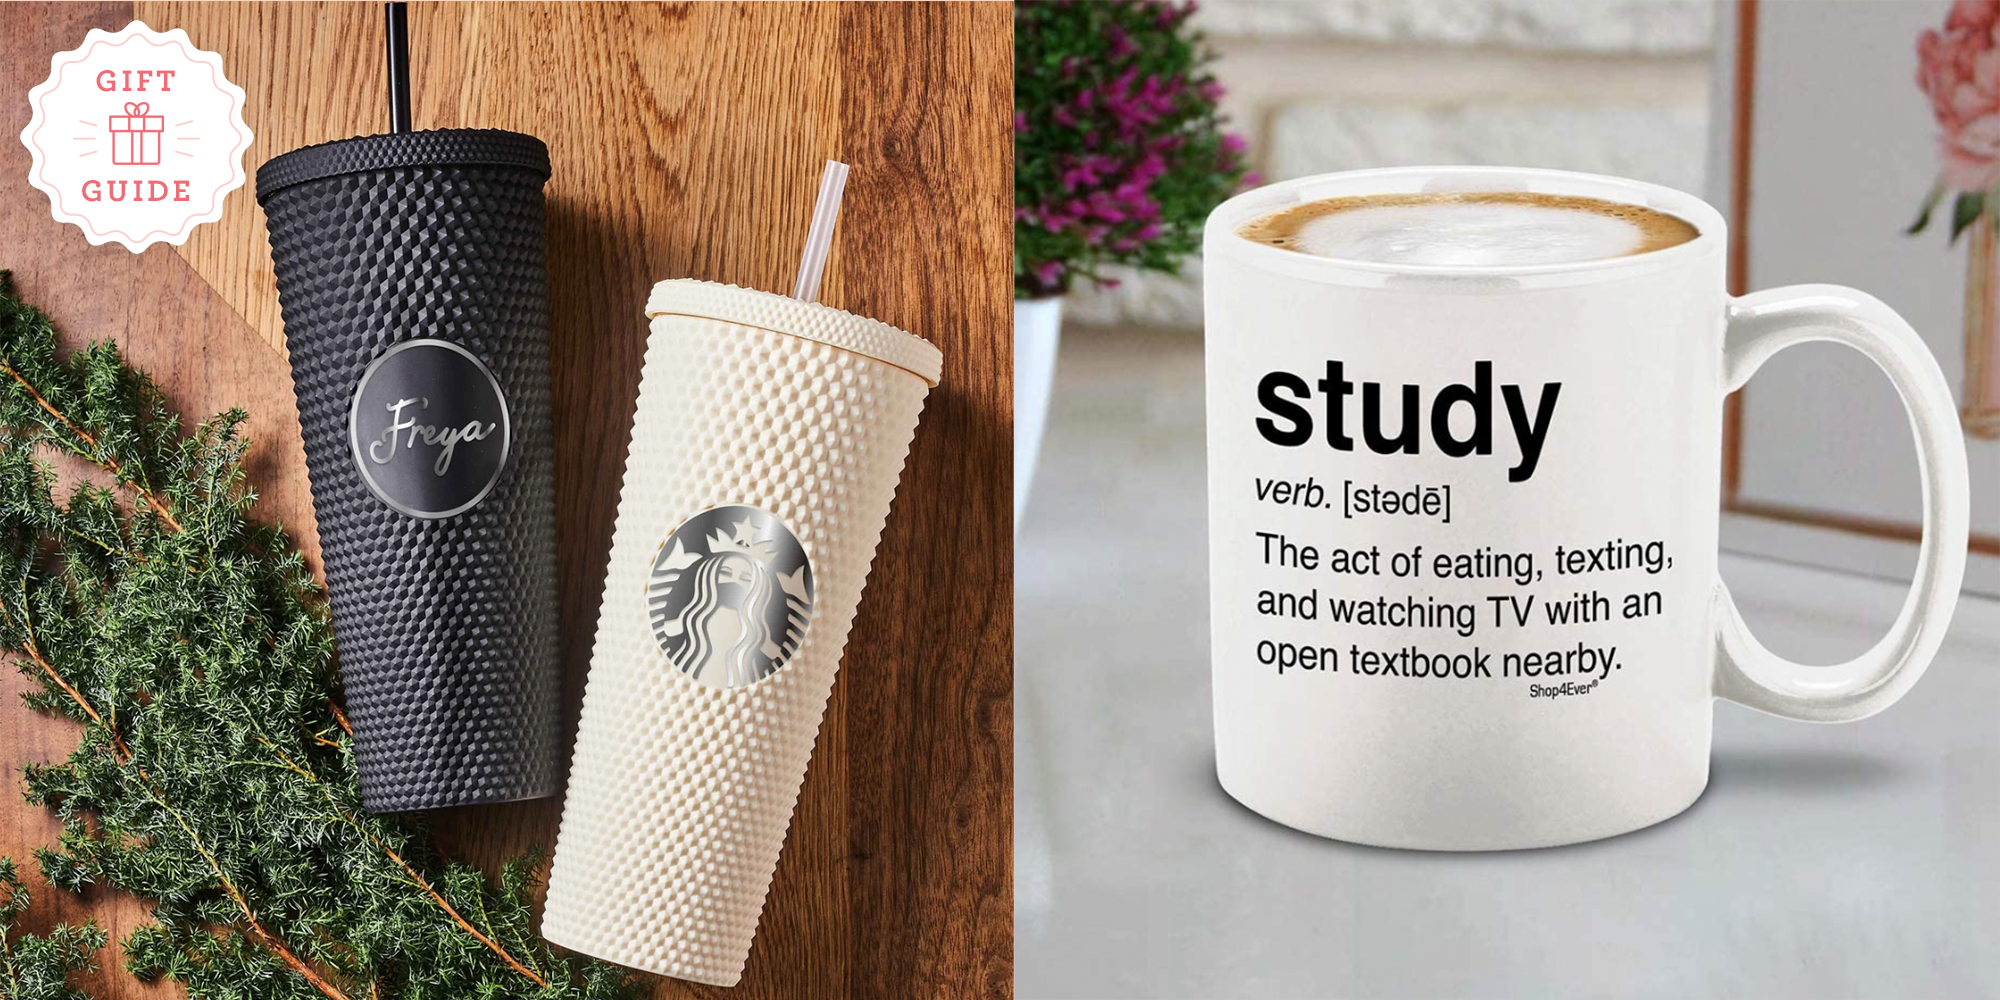 30 Best Gifts for Teens and Best Gifts for College Students